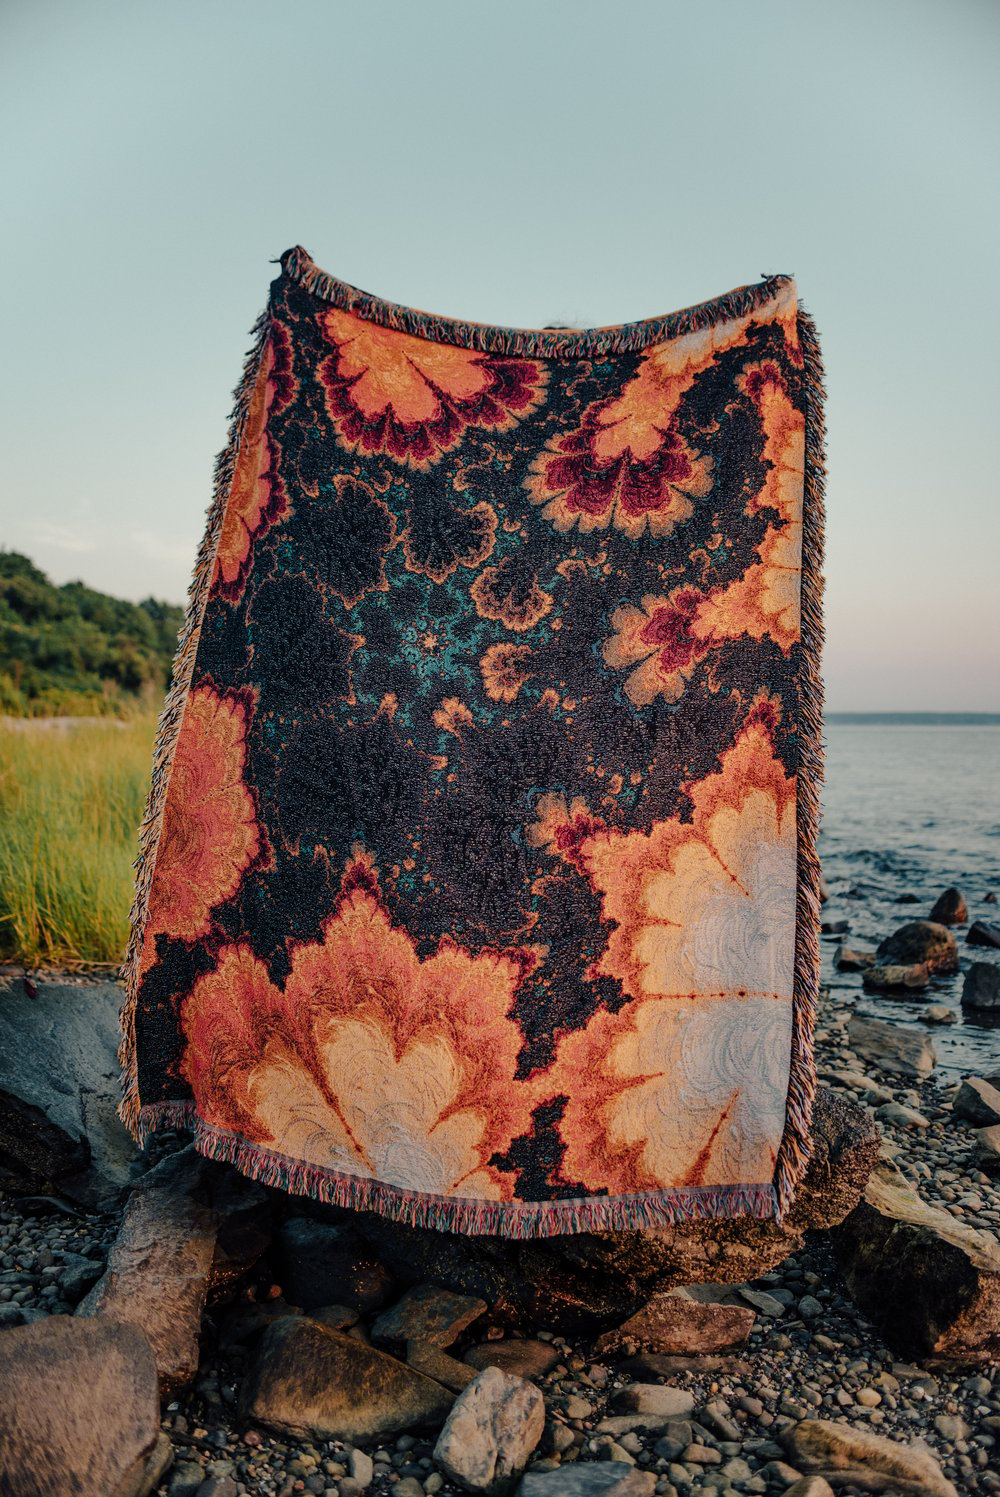 Limited Edition XL Woven Blanket #1